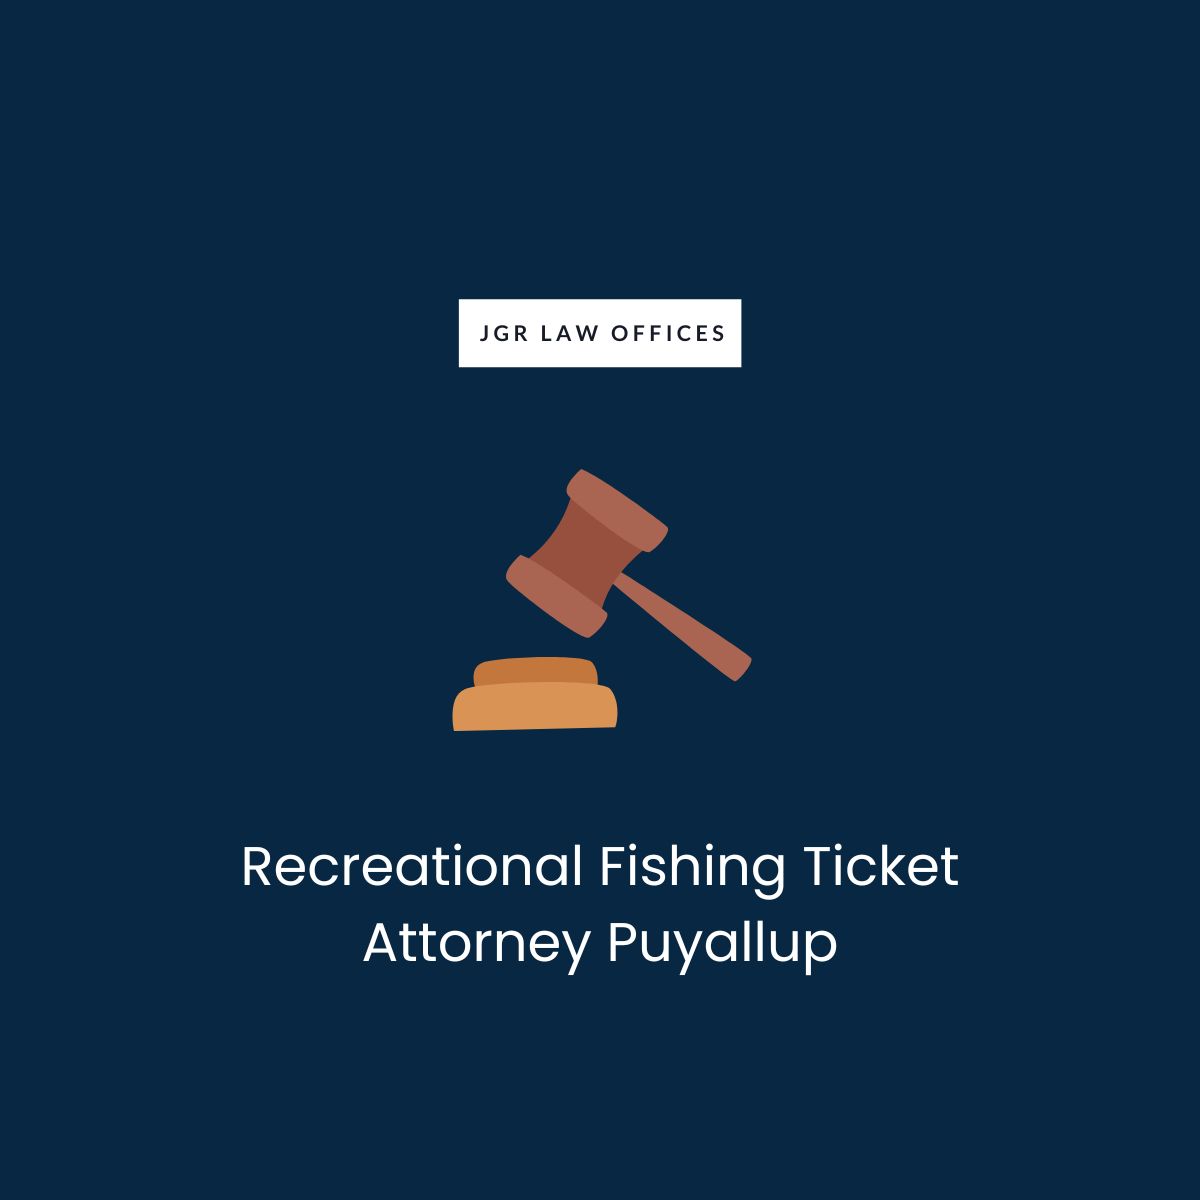 Recreational Fishing Ticket Attorney Puyallup